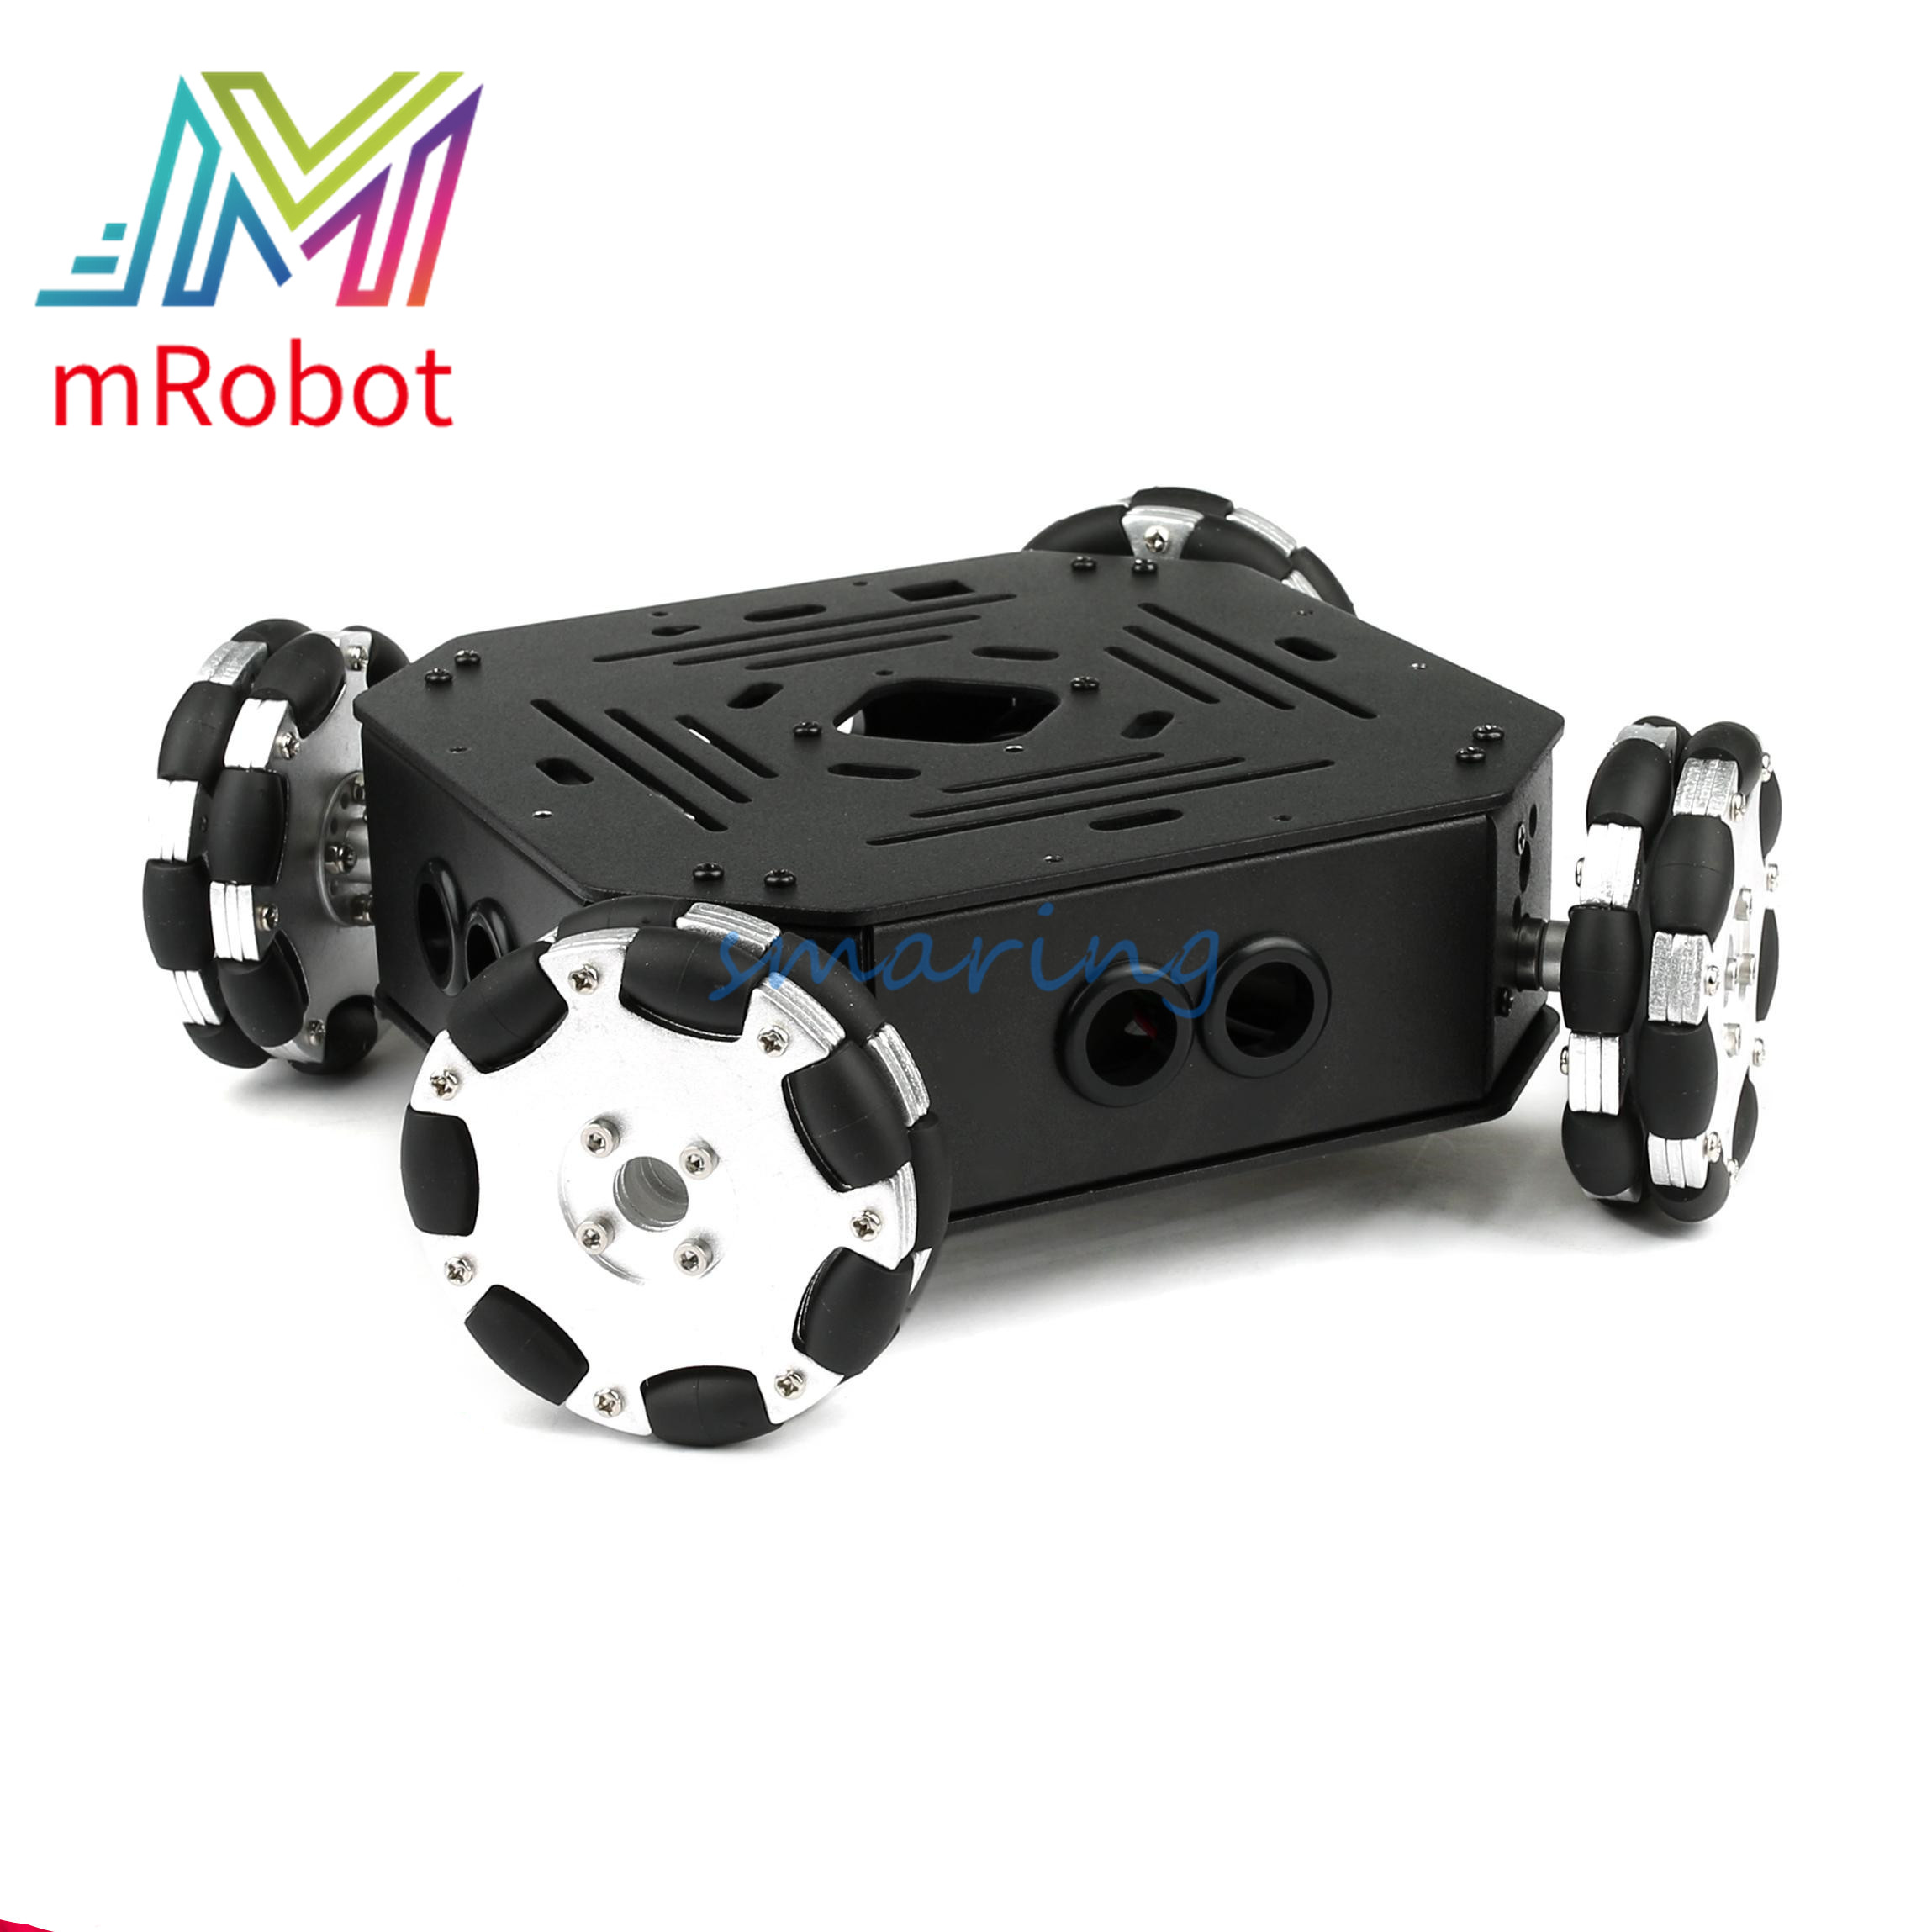 4wd Mcnamm Wheel Car Chassis Omni Directional Wheel Smart Car Chassis for Robot DIY Graduation Toy Model Kit